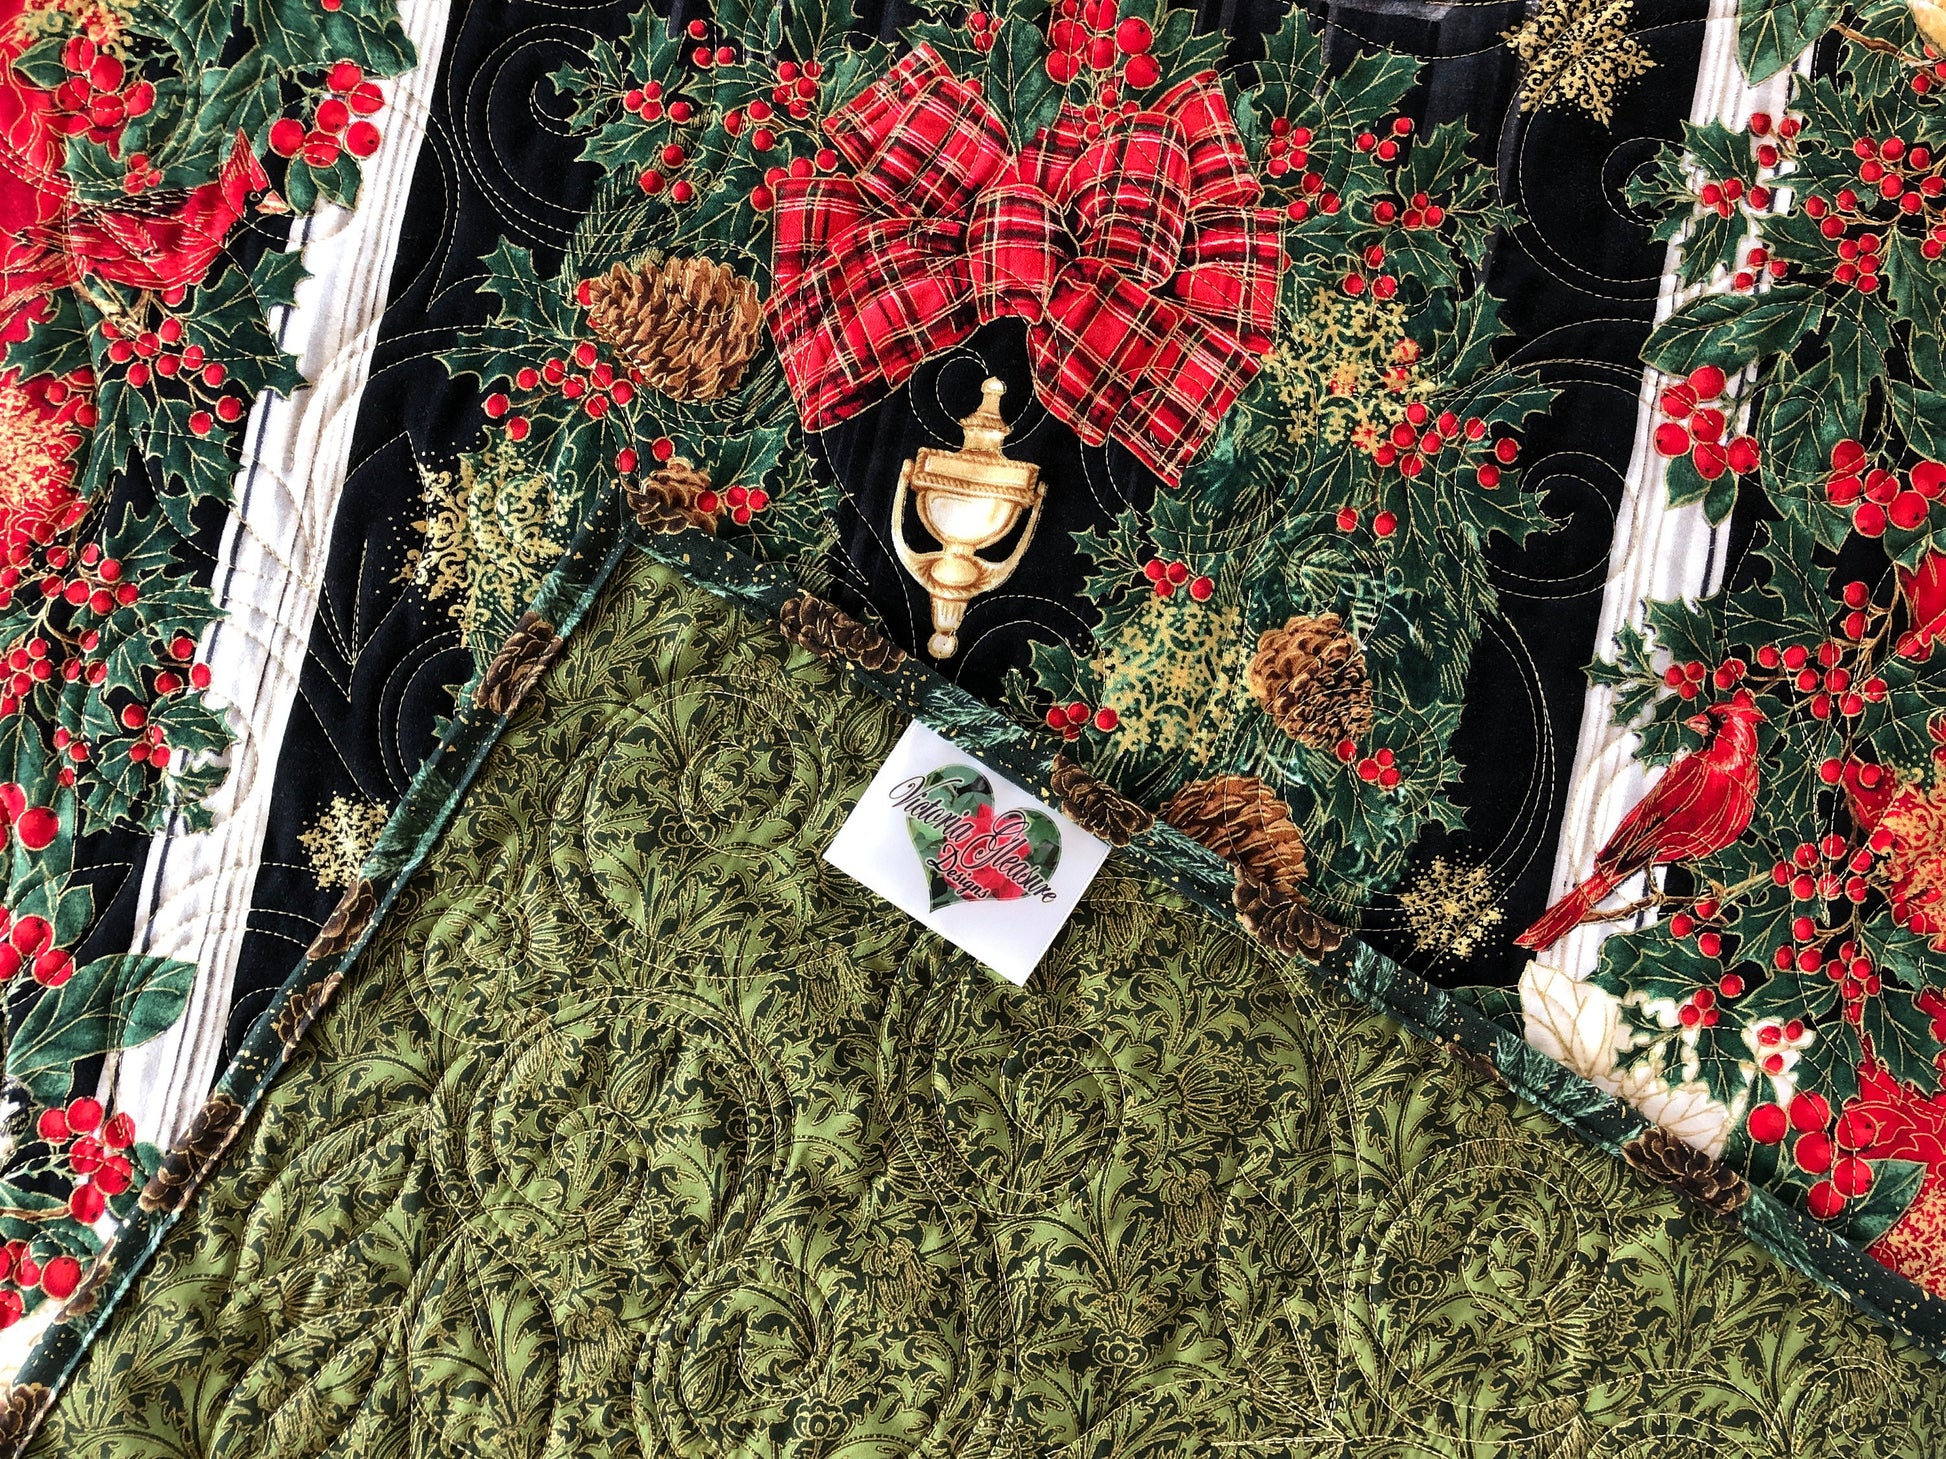 Welcome Christmas Door Handmade Throw Quilt, With Wreath and Poinsettia, Red, Green, White, and Metallic Gold, Throw Quilt